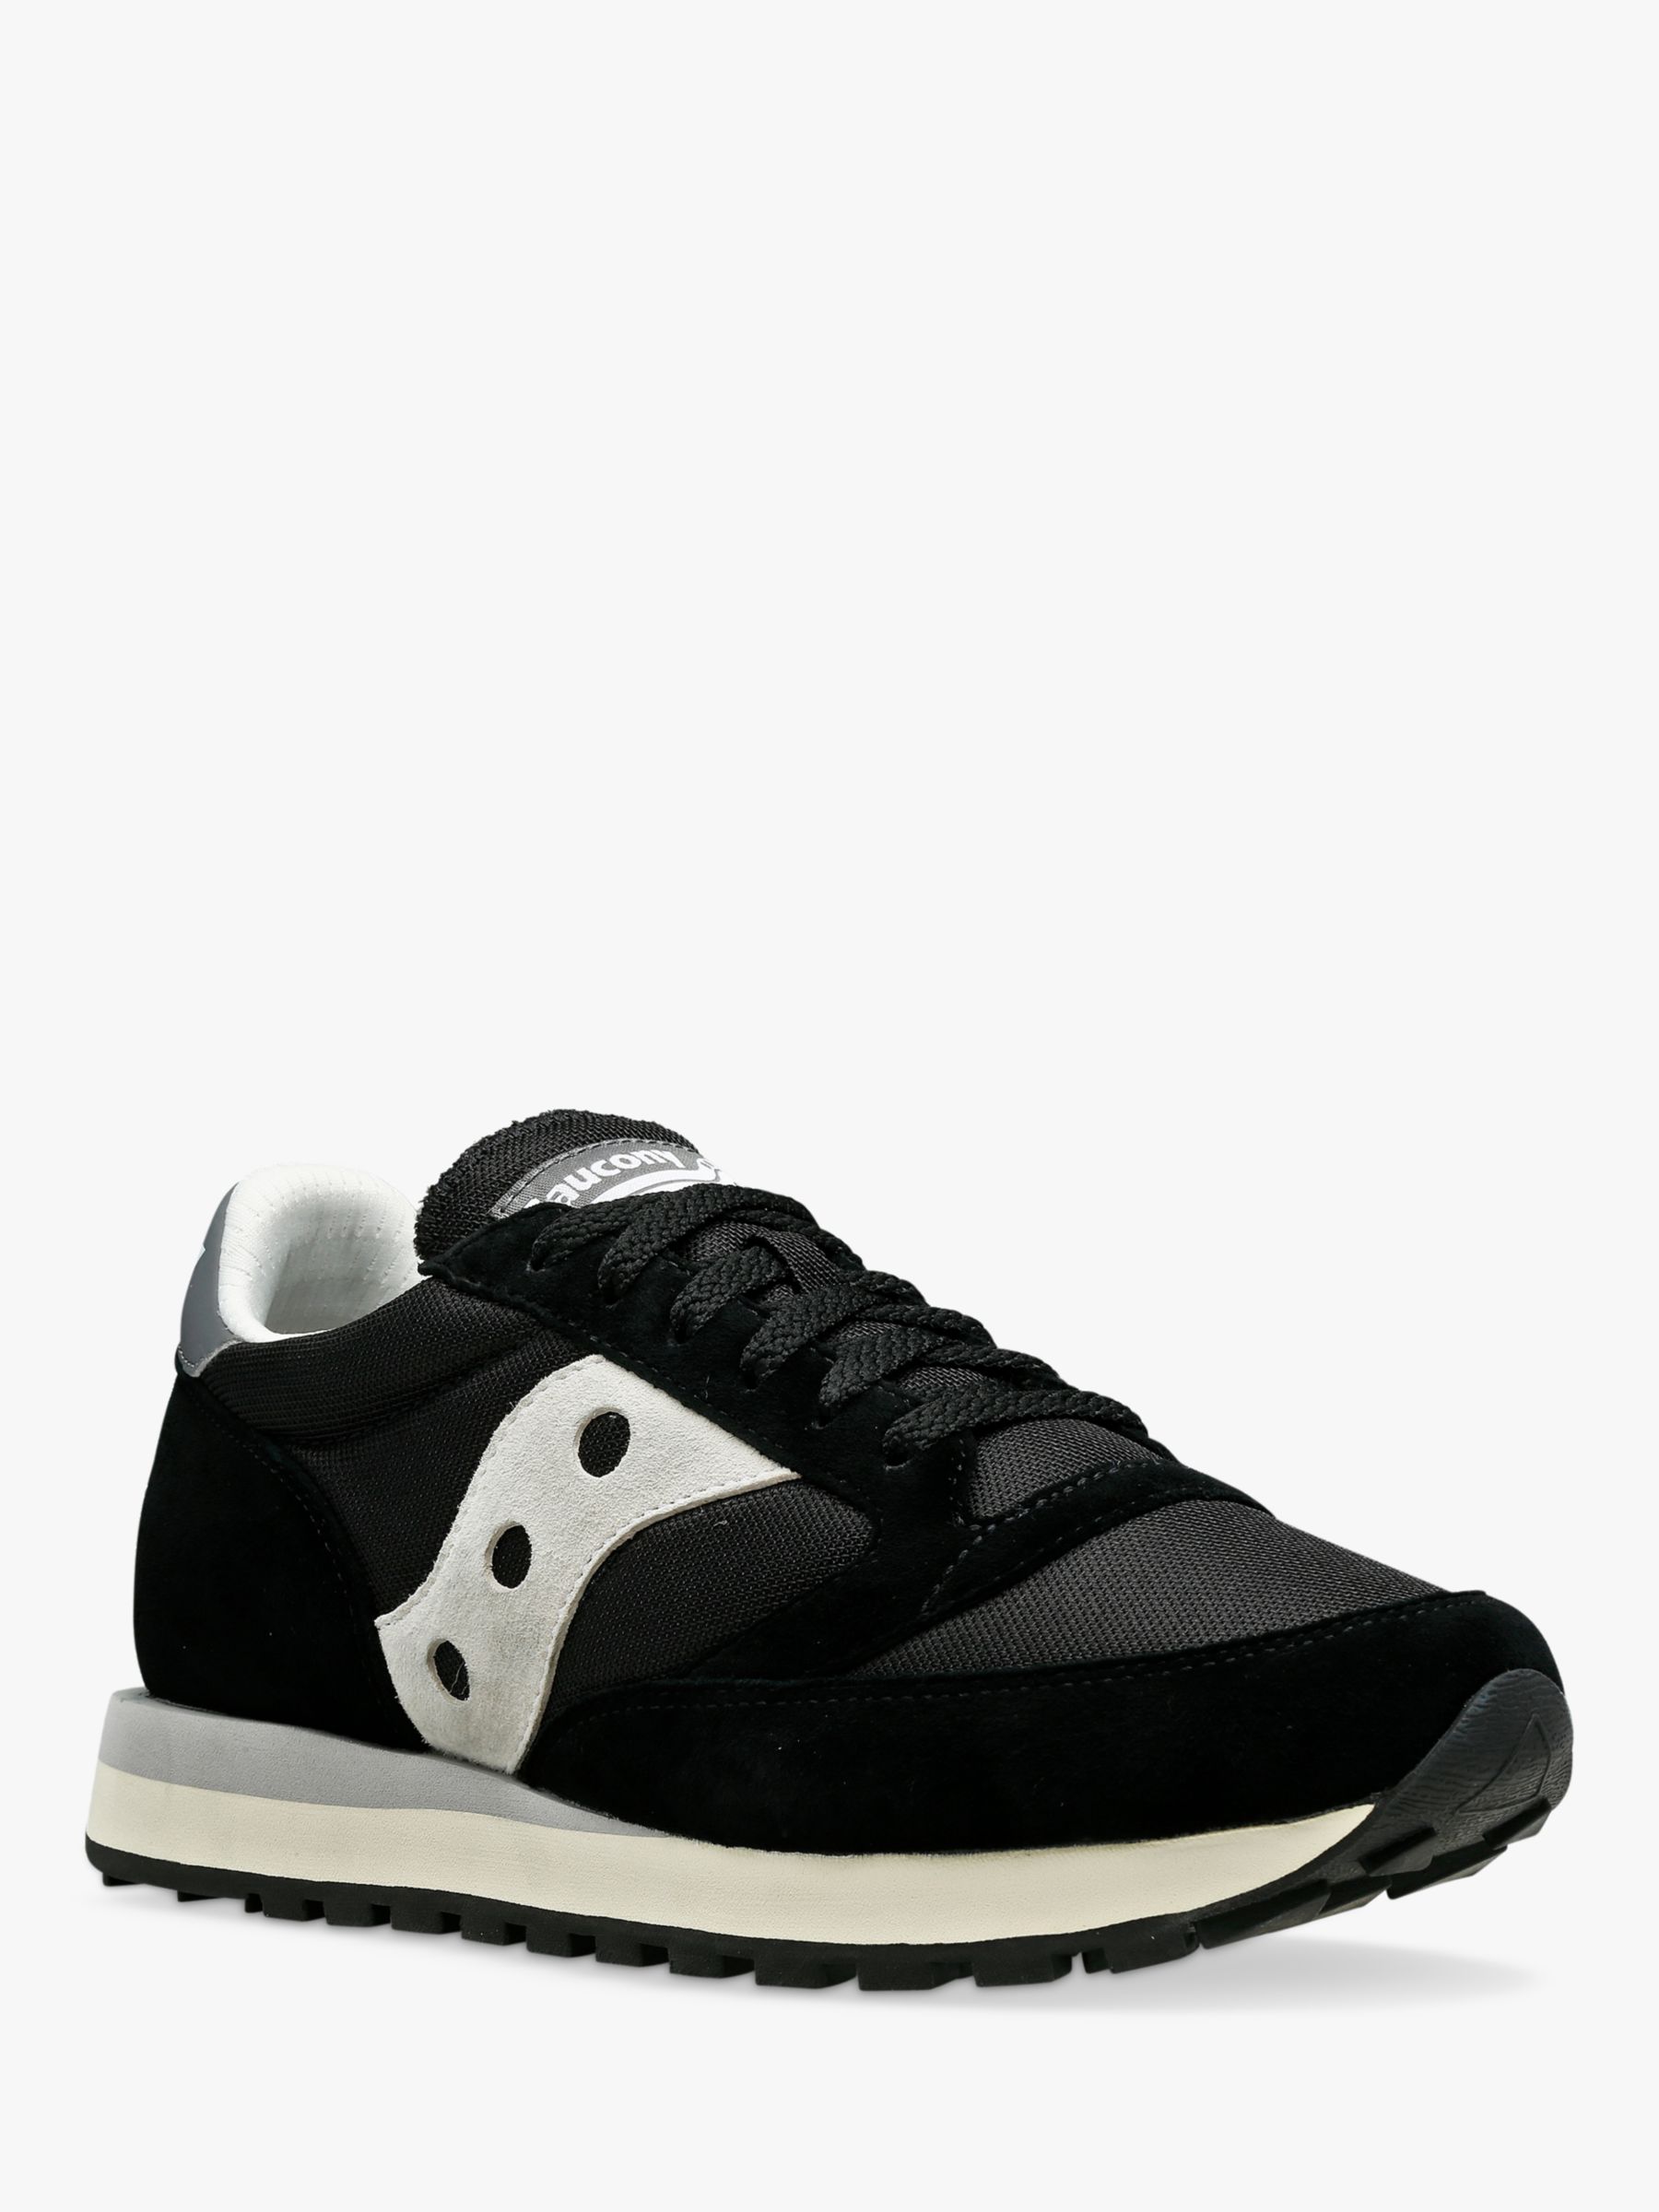 Saucony Jazz 81 Hike Lace Up Trainers, Black, 7